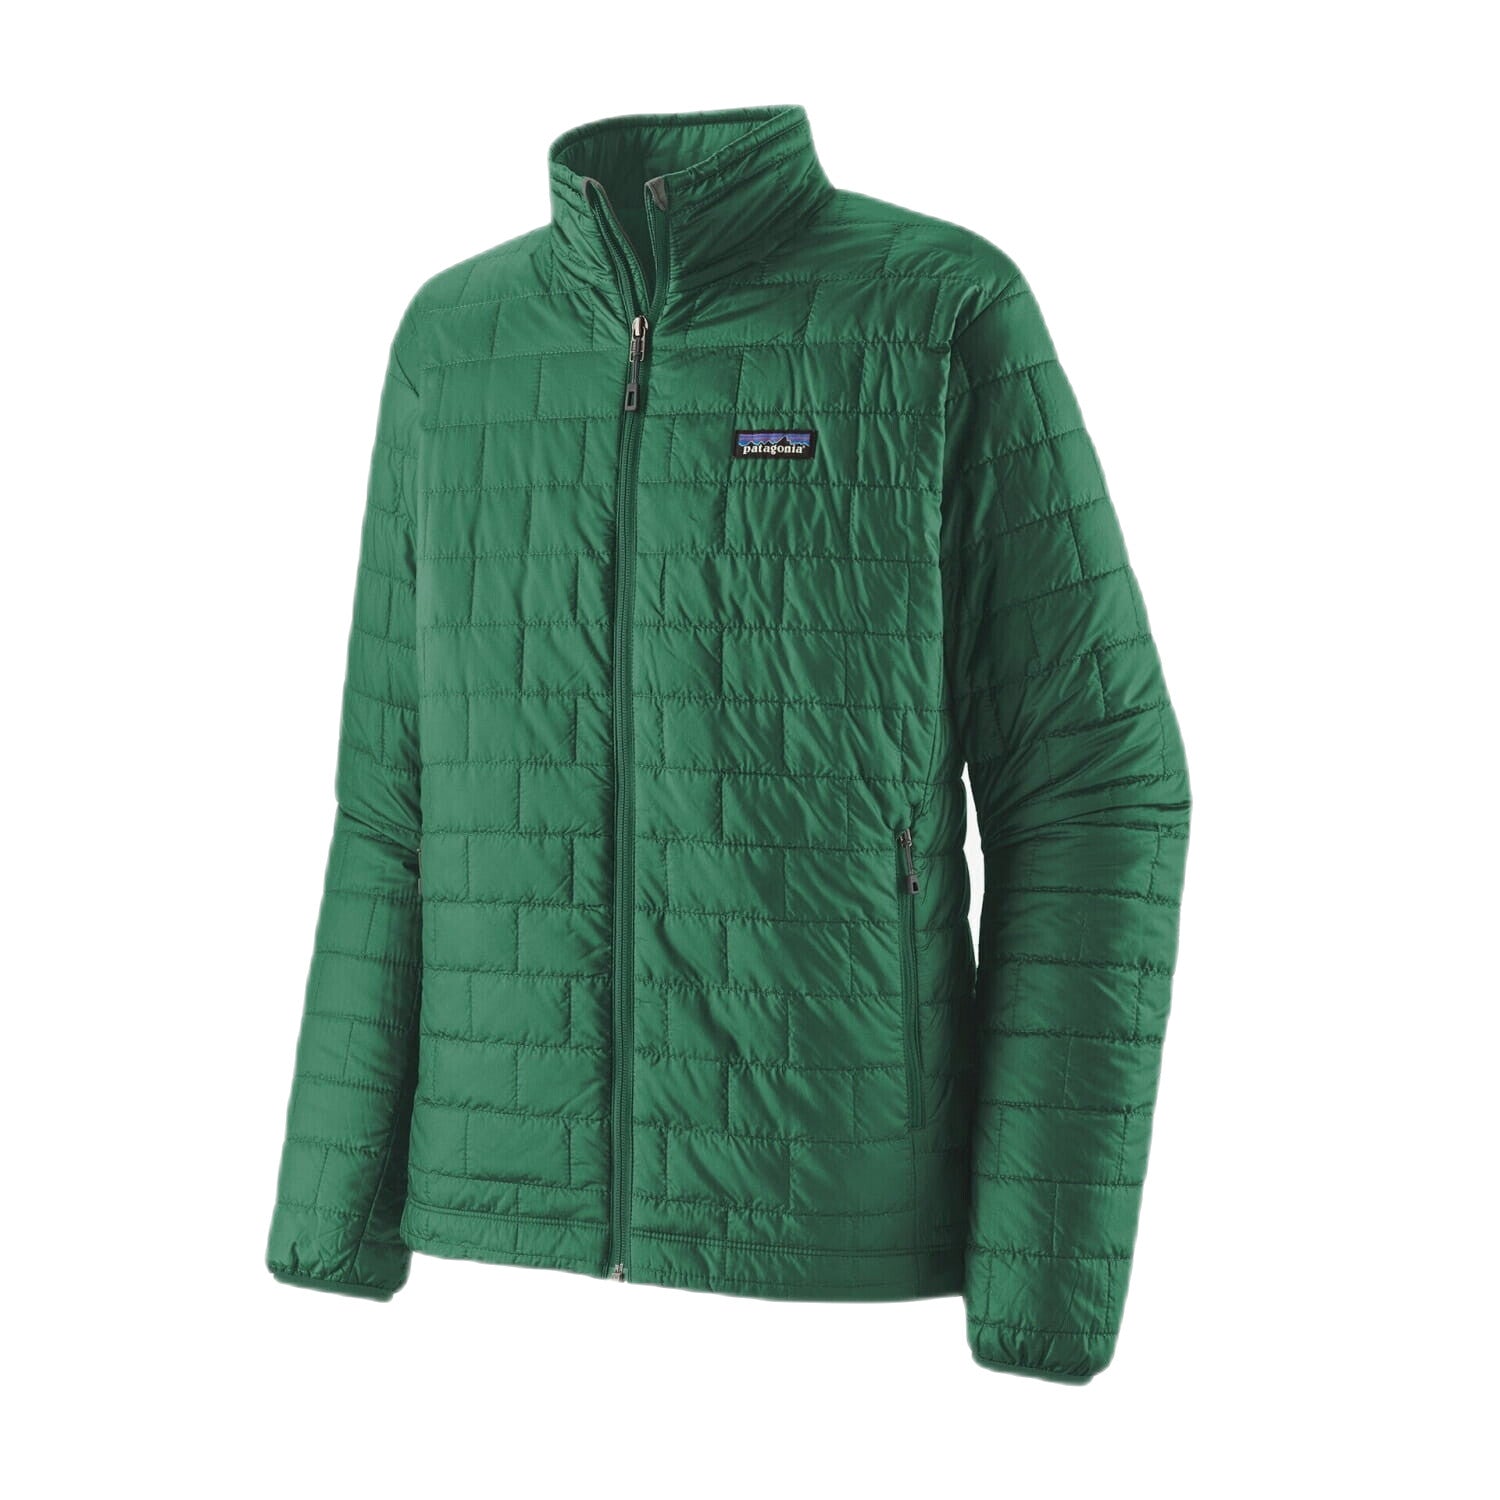 Patagonia Men's Nano Puff Jacket shown in the Conifer Green color. Front view.